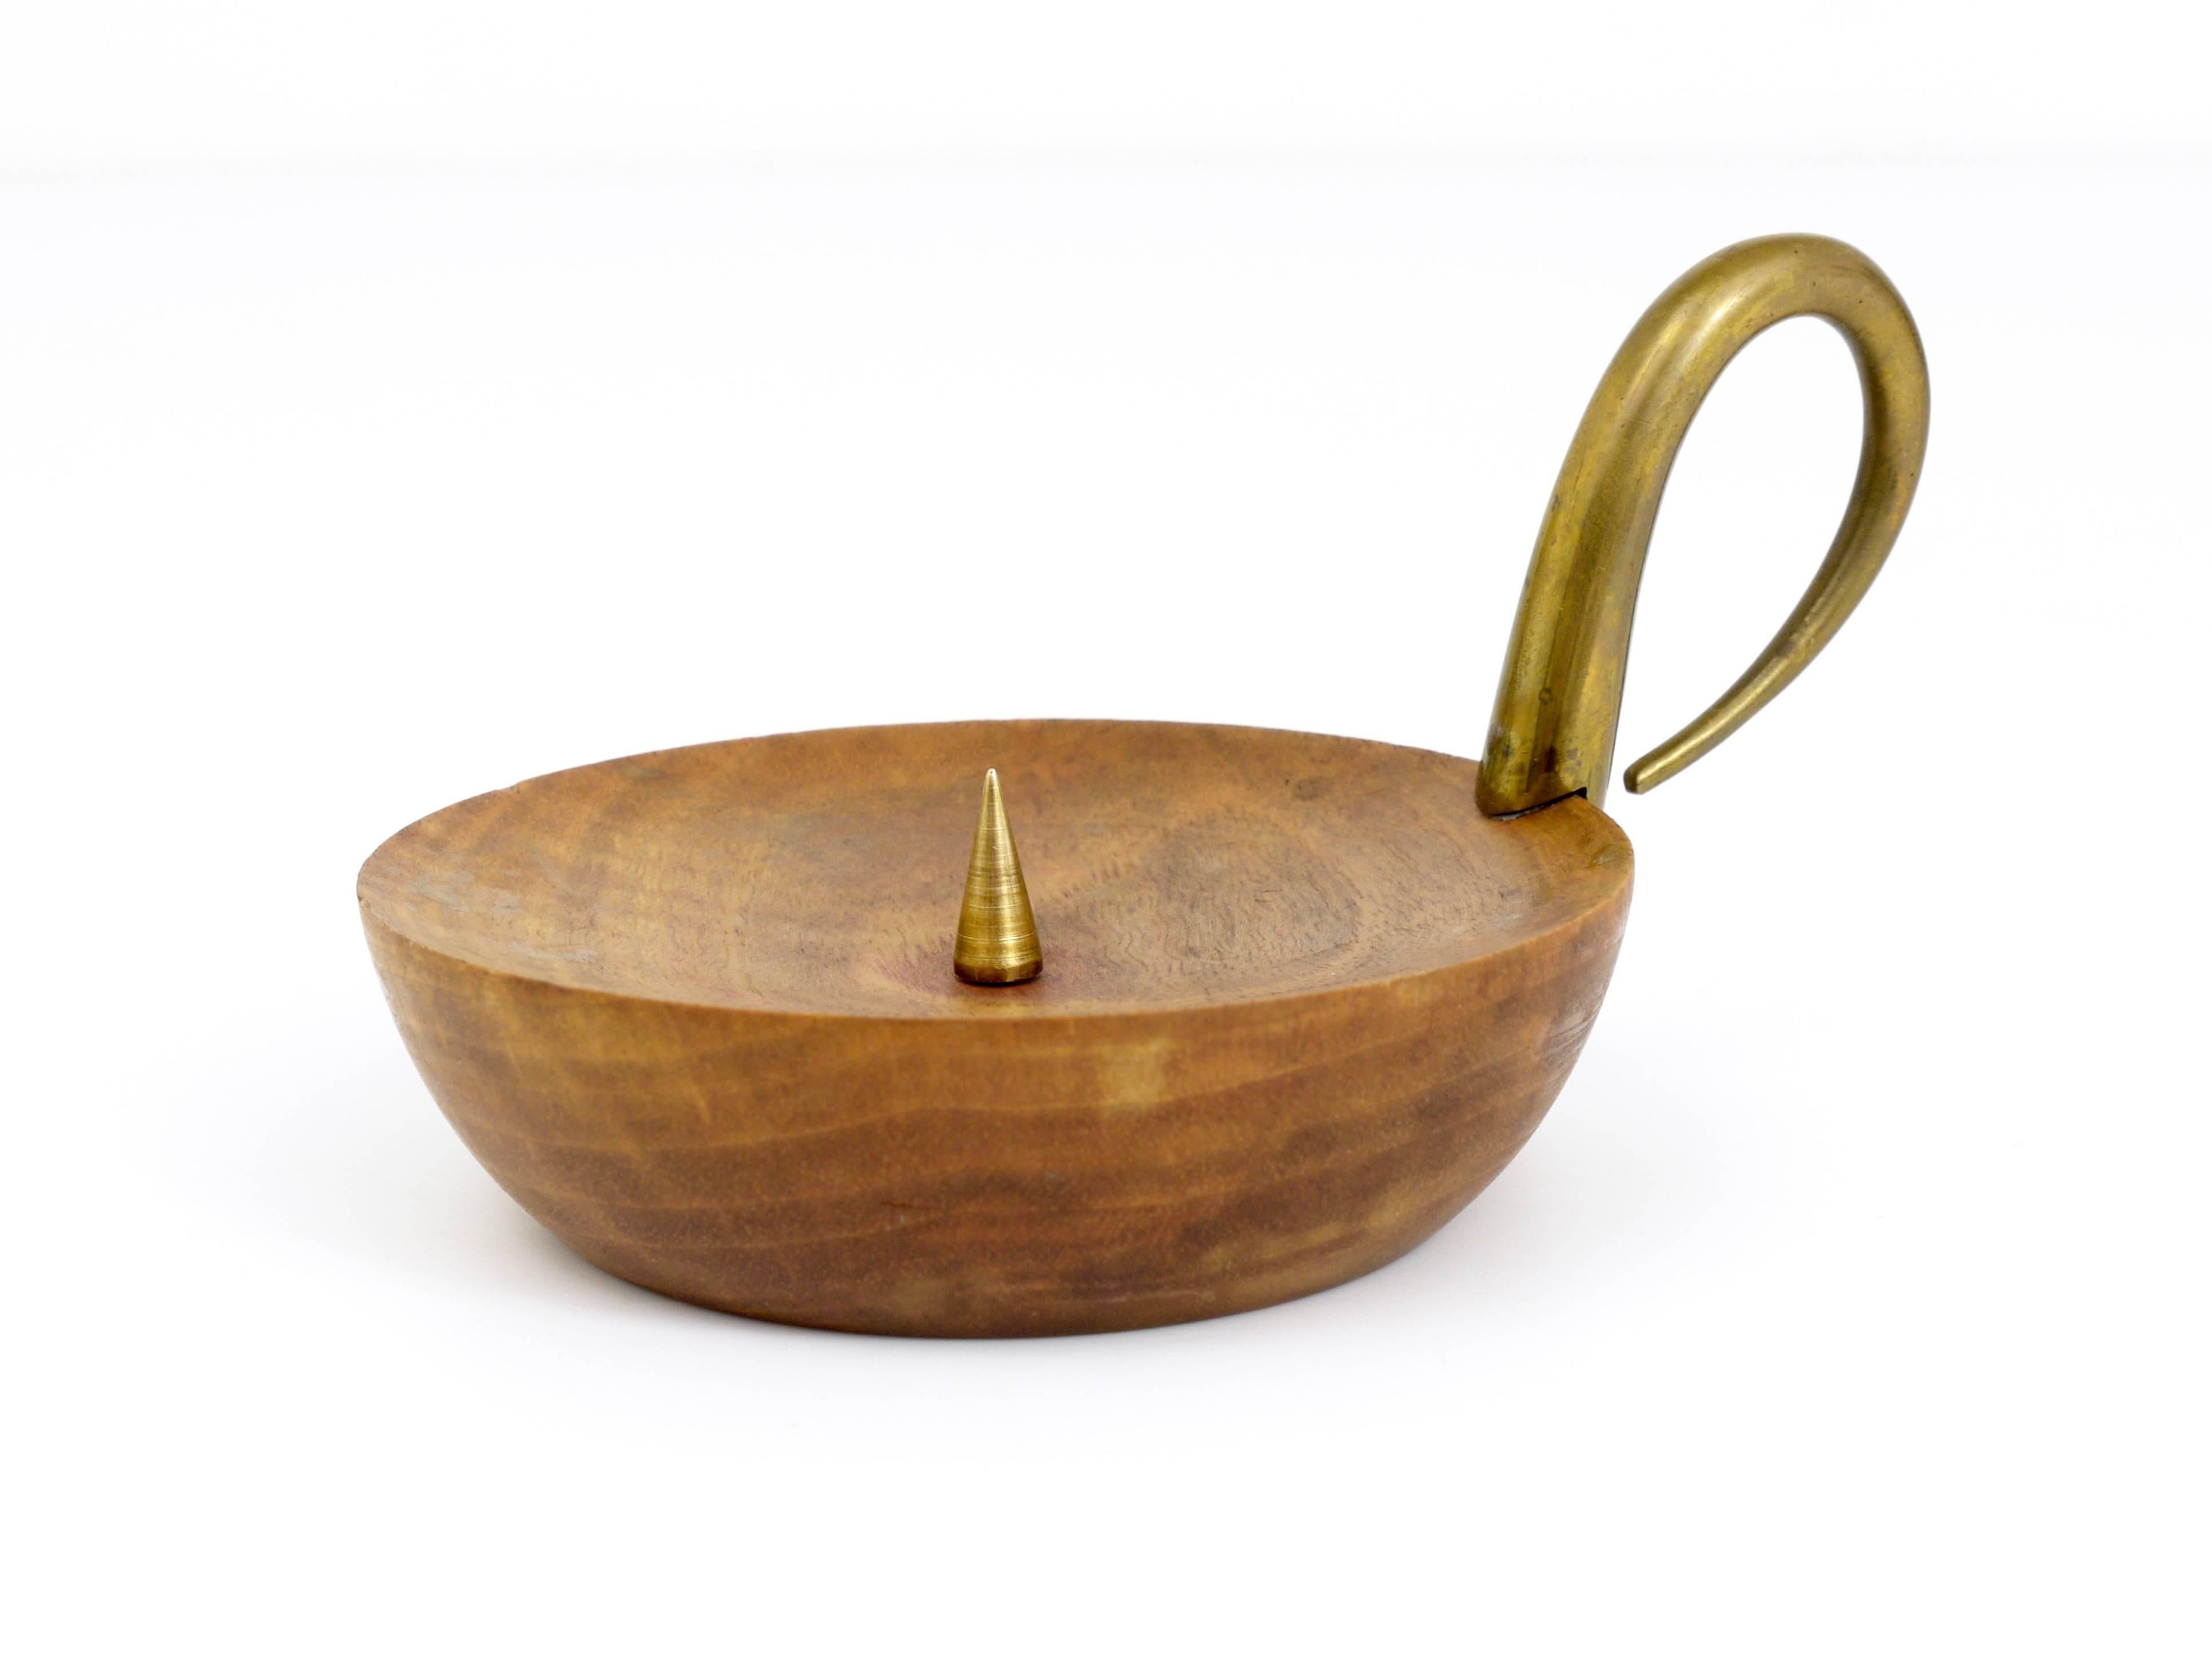 A beautiful modernist candleholder, made of walnut and brass, designed an manufactured by Carl Auböck, Austria, Vienna, in the 1950s. In very good condition.